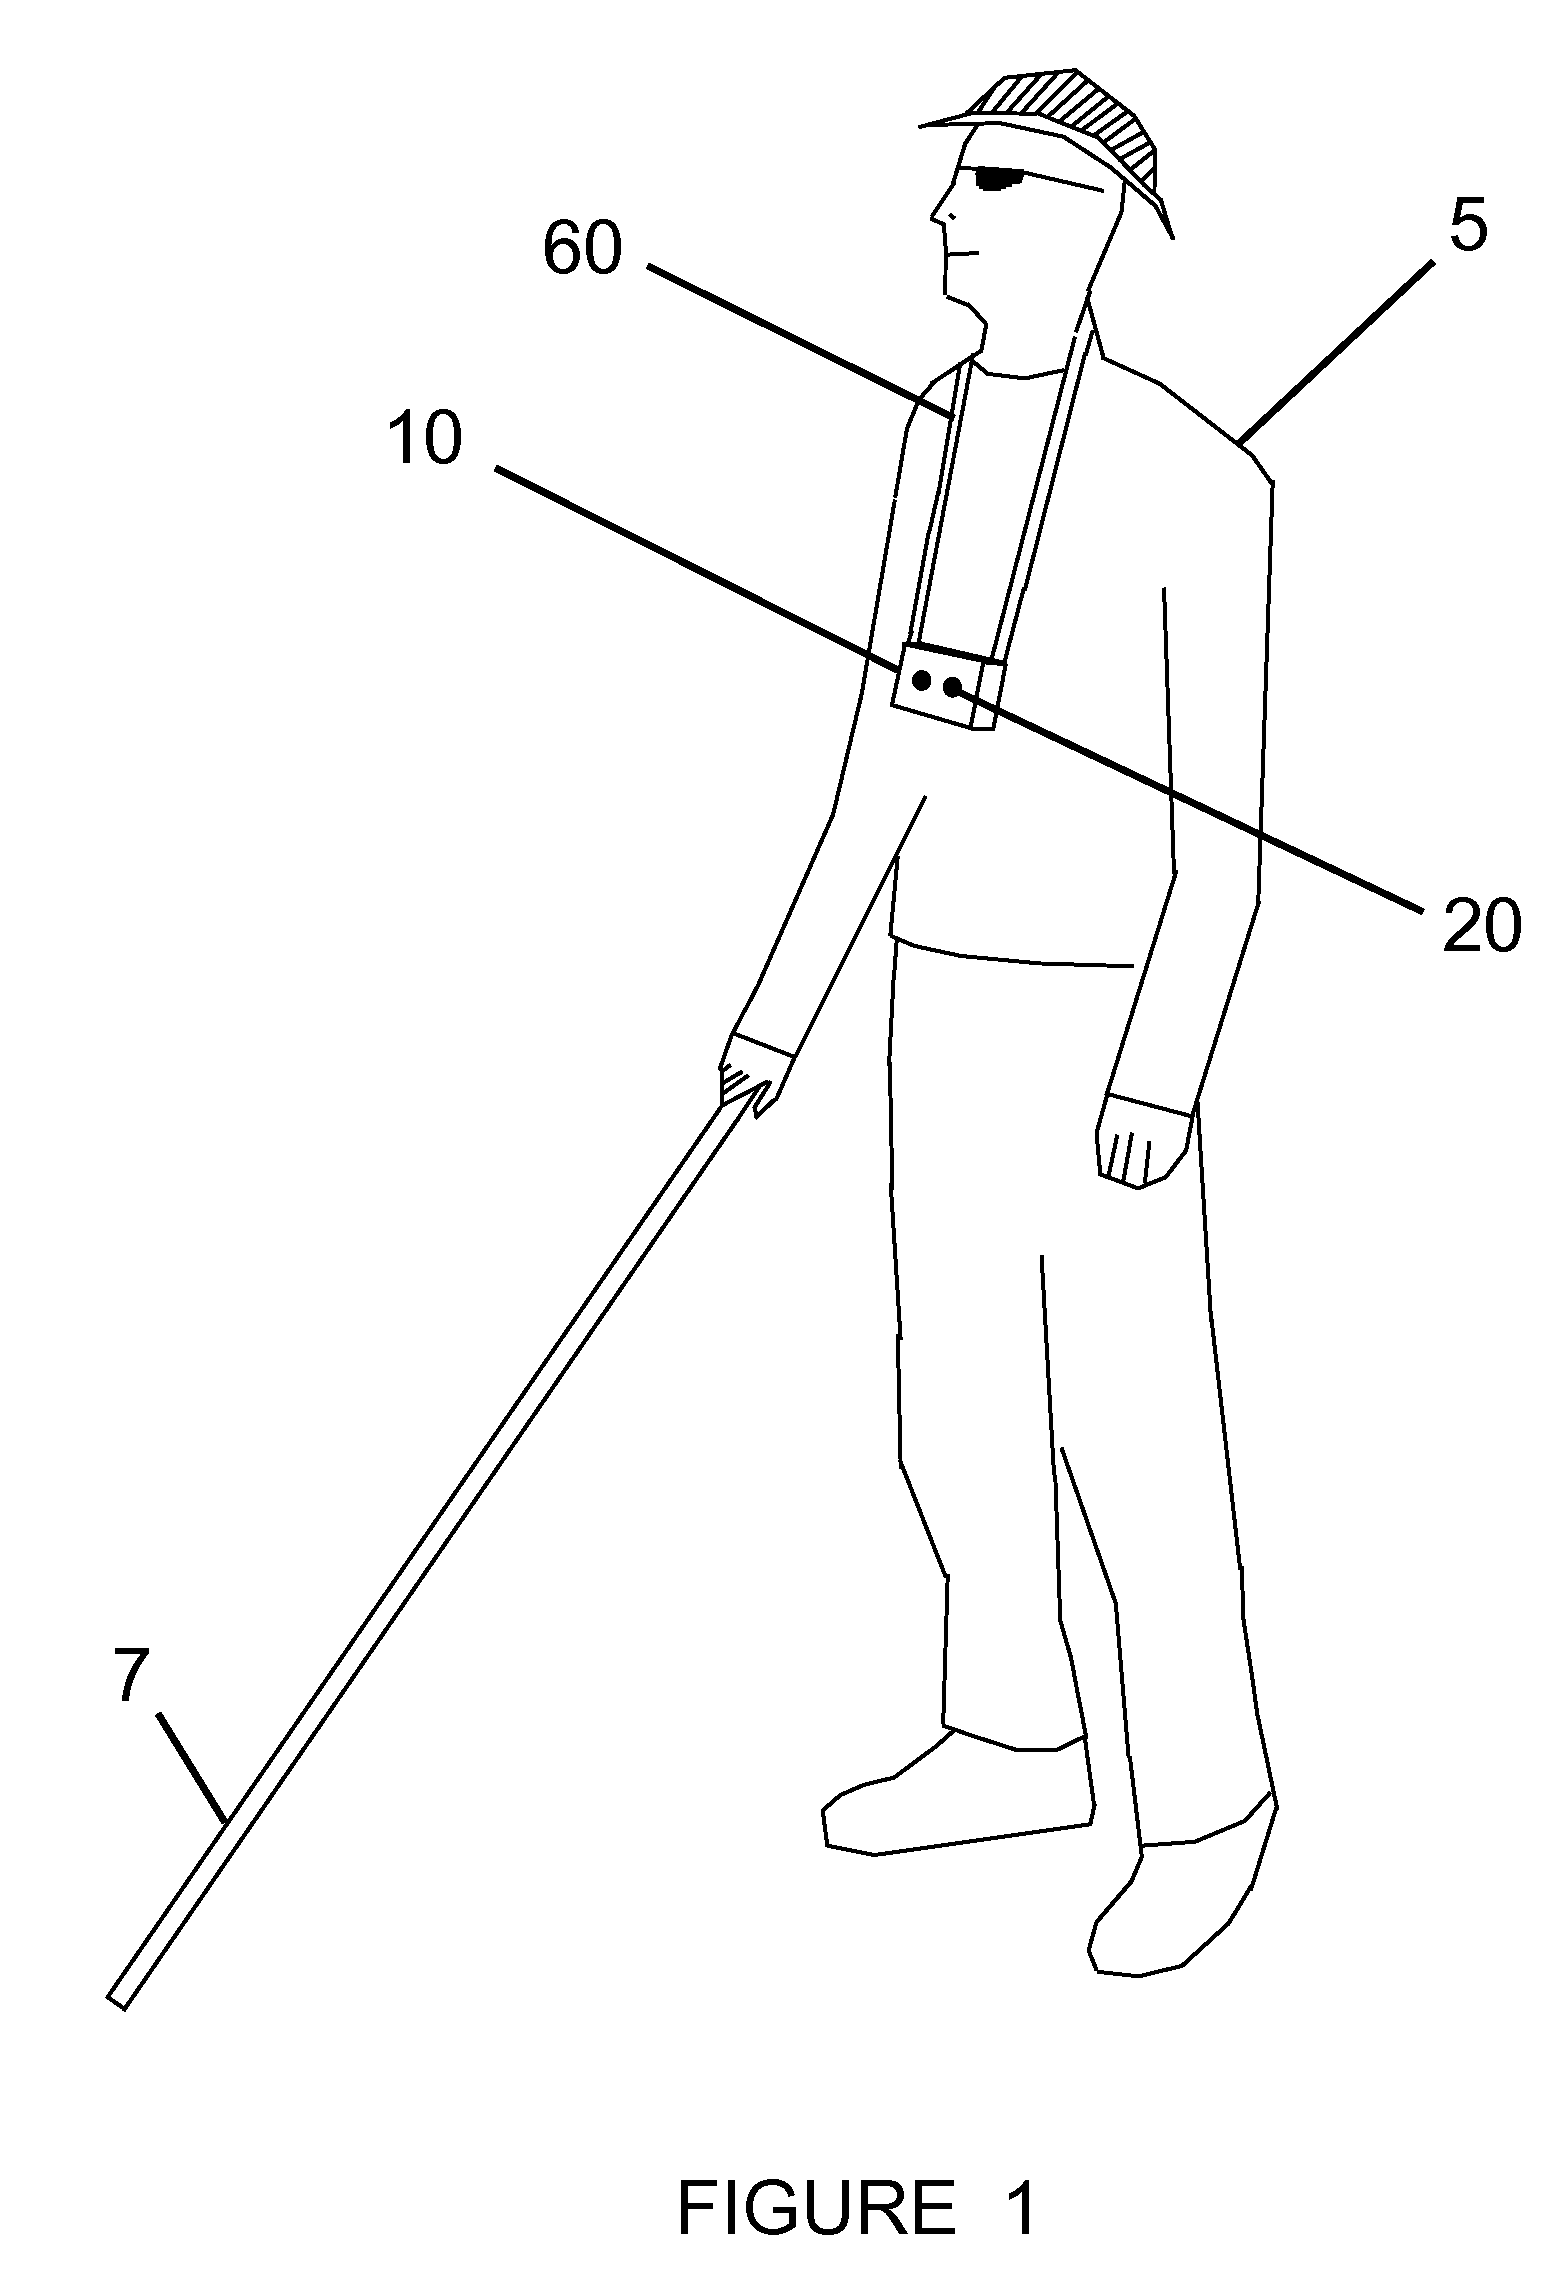 System and method for alerting visually impaired users of nearby objects